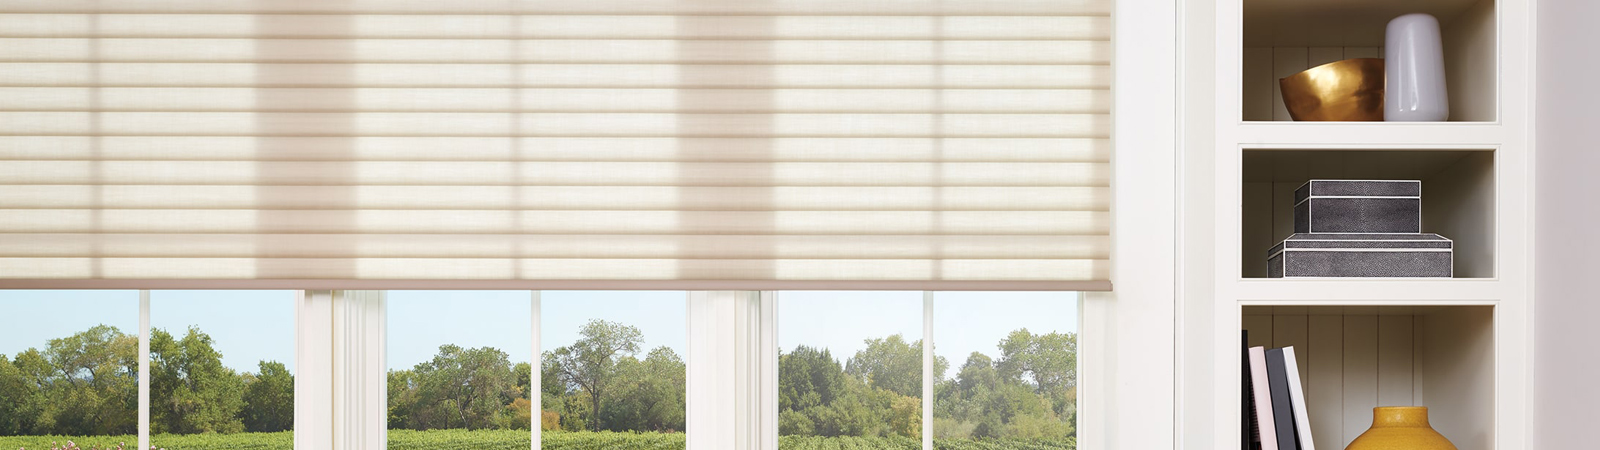 Window Shades Top Ers 60 Off, Are Roller Shades Better Than Blinds For Windows